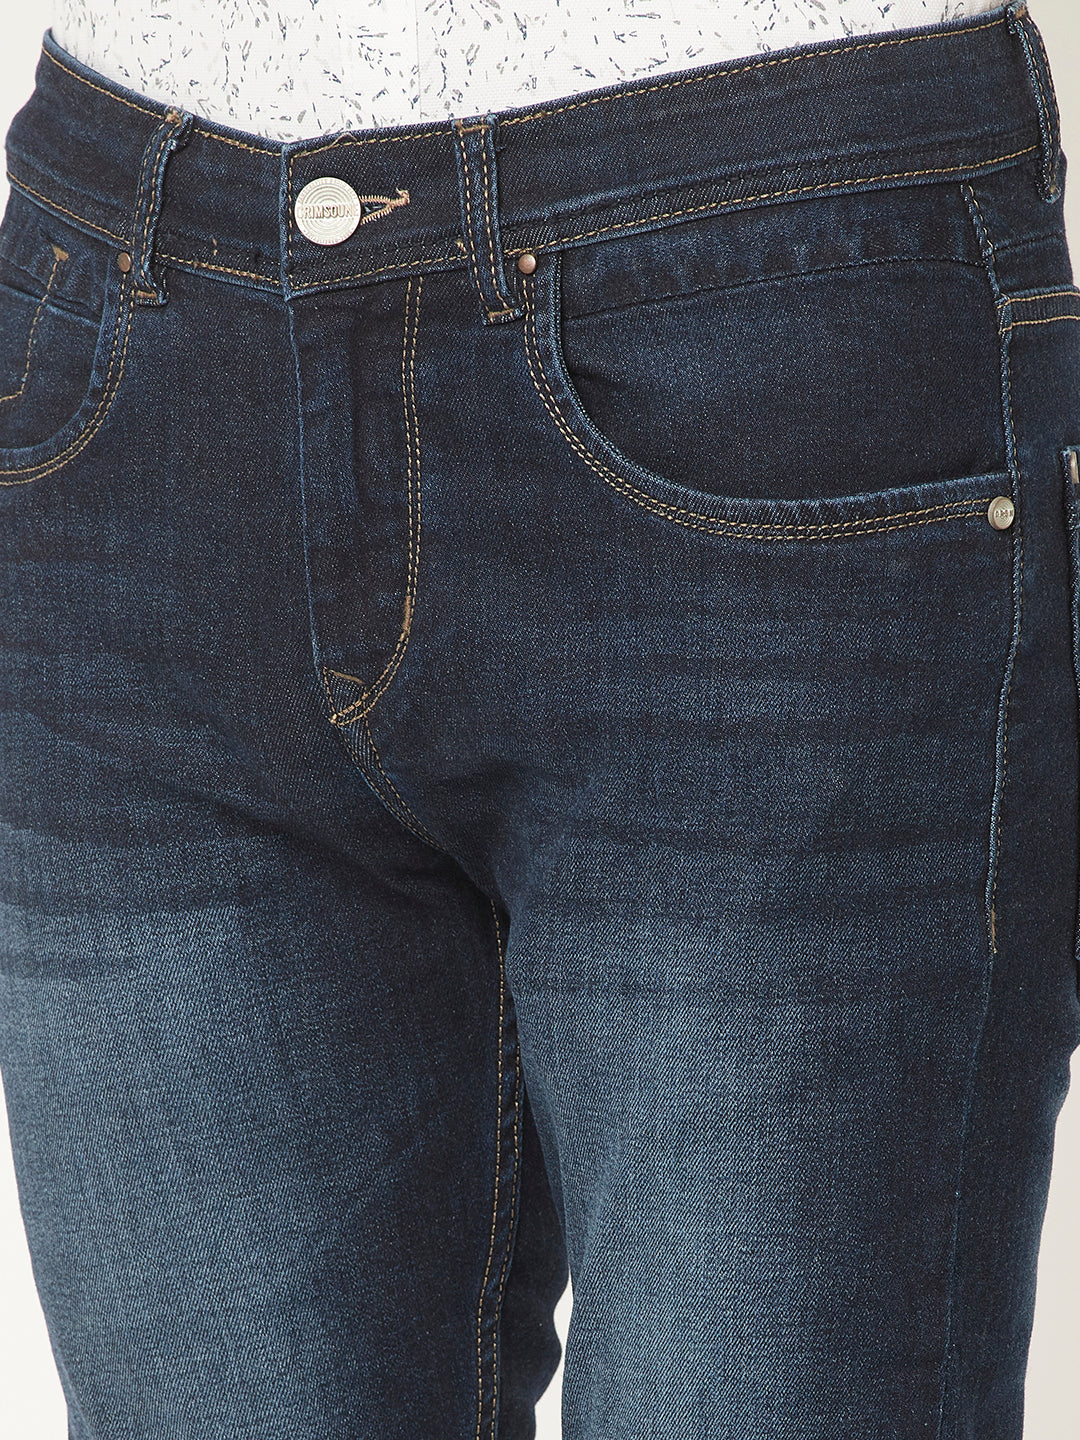  Dark Blue Jeans with 5 Pocket Styling 